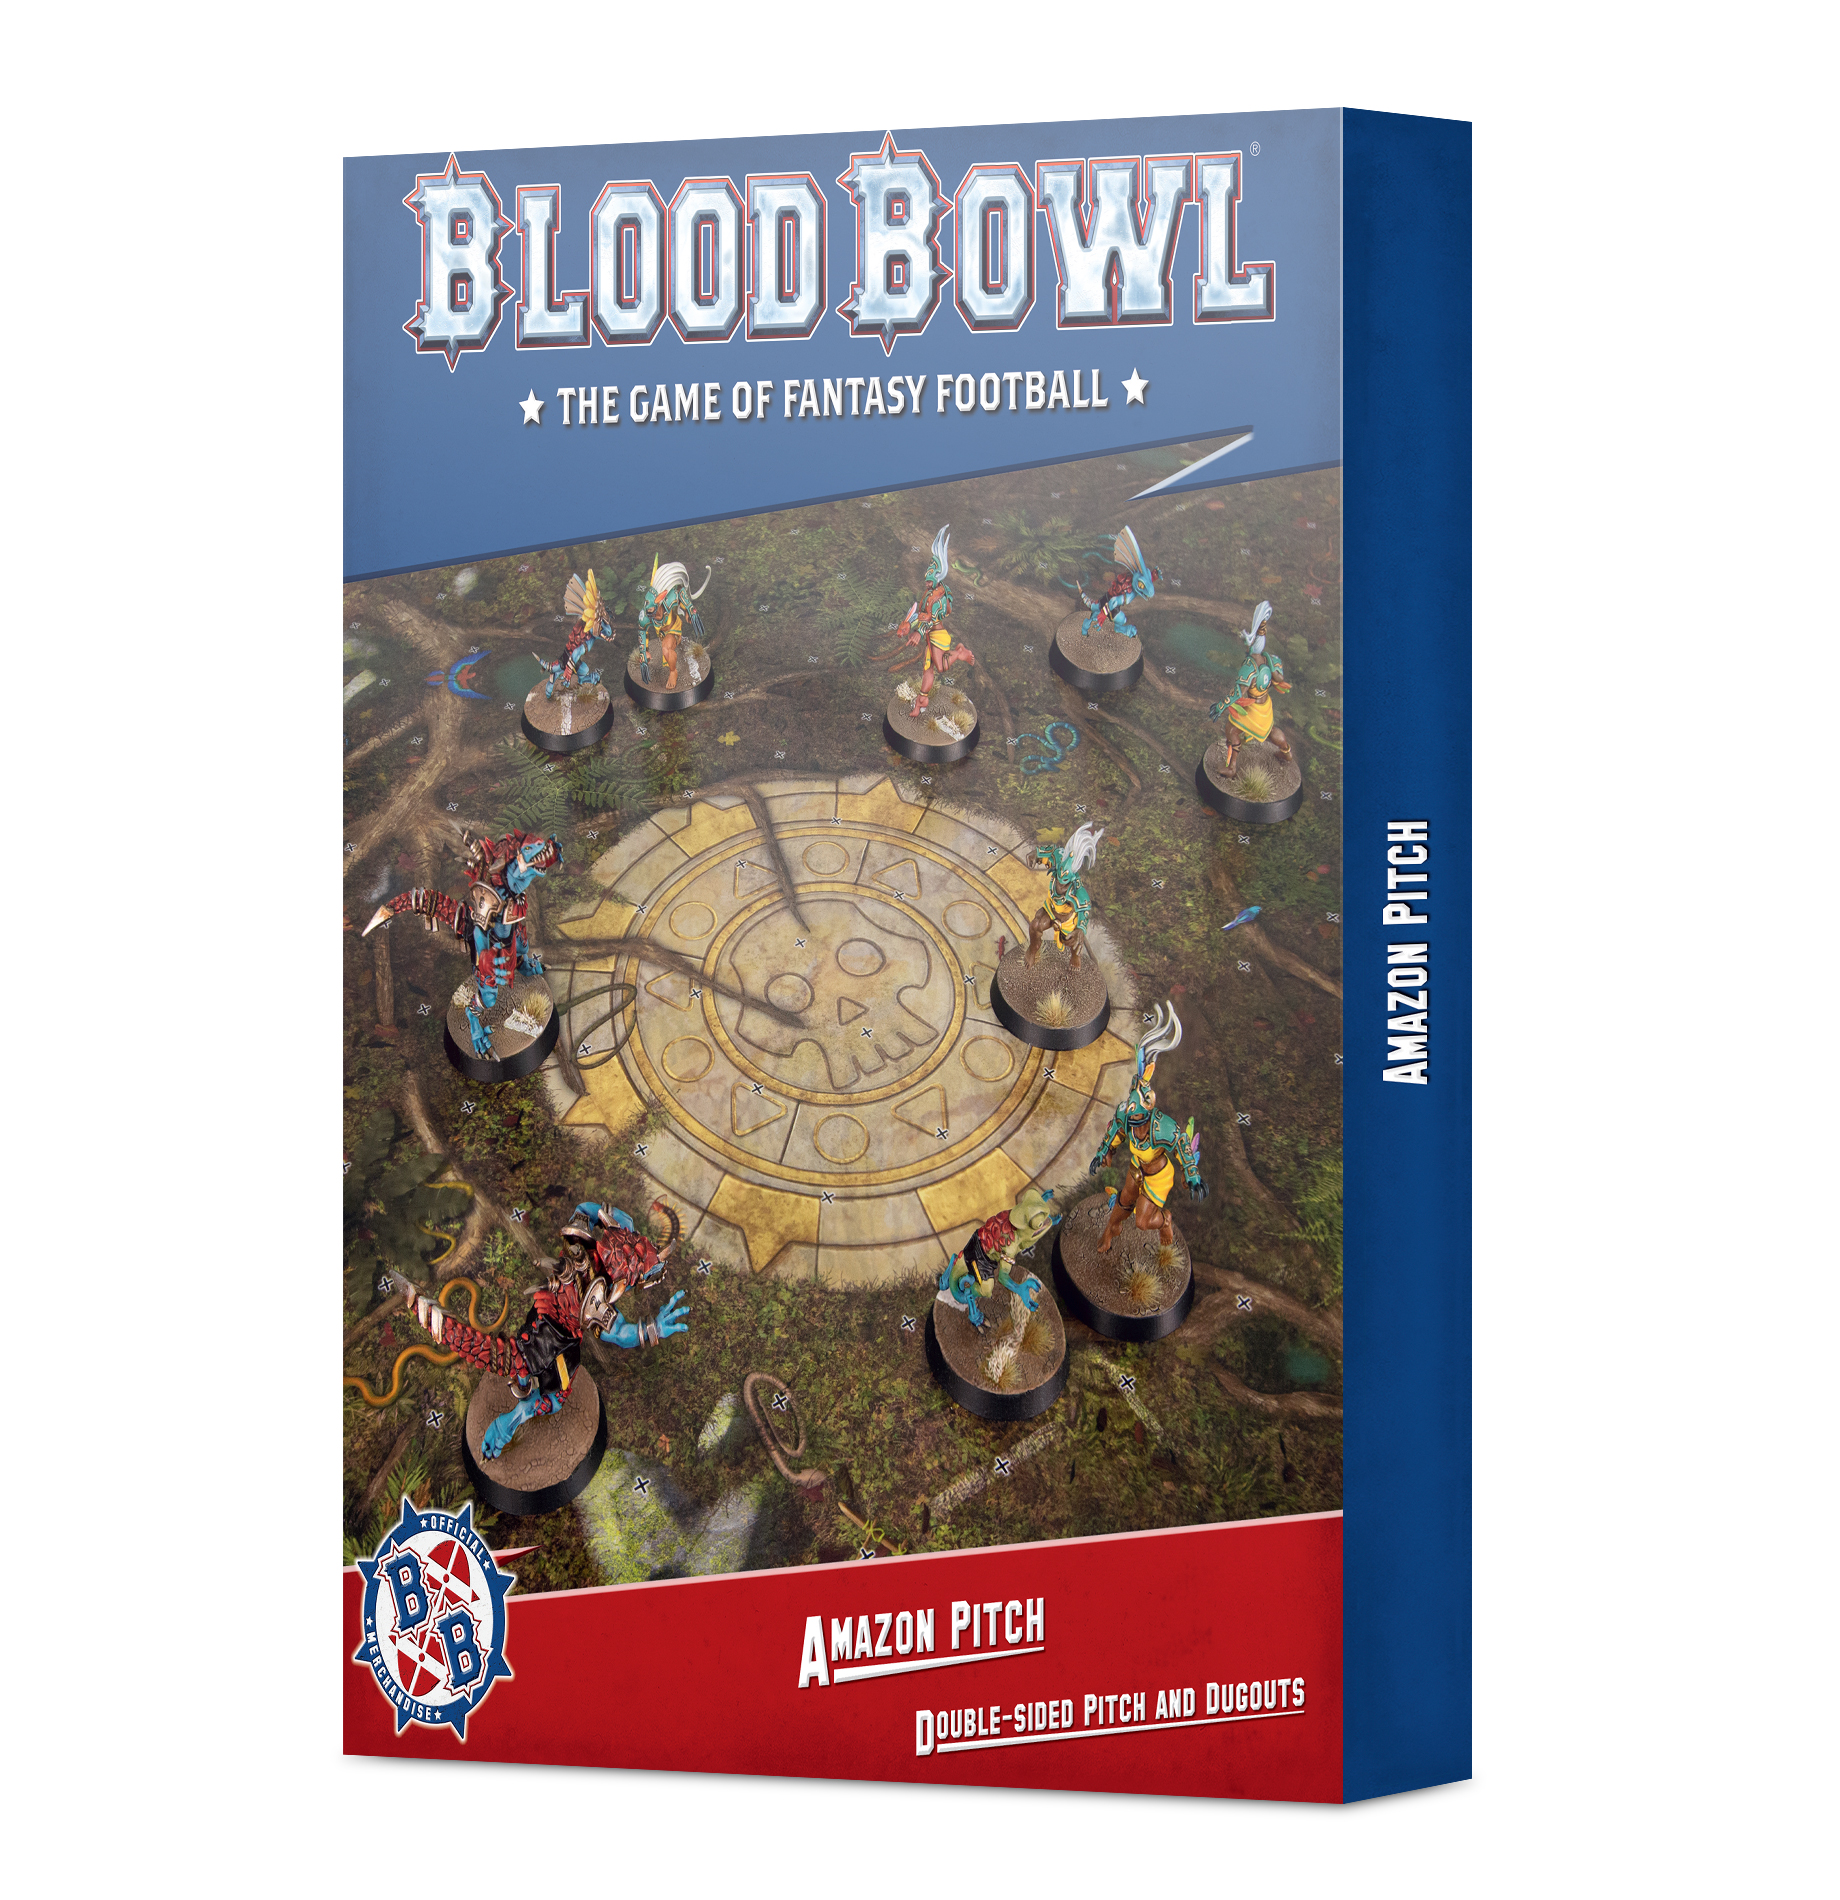 Double-sided - Amazon Pitch and Dugout- 202-29 - BLOOD BOWL